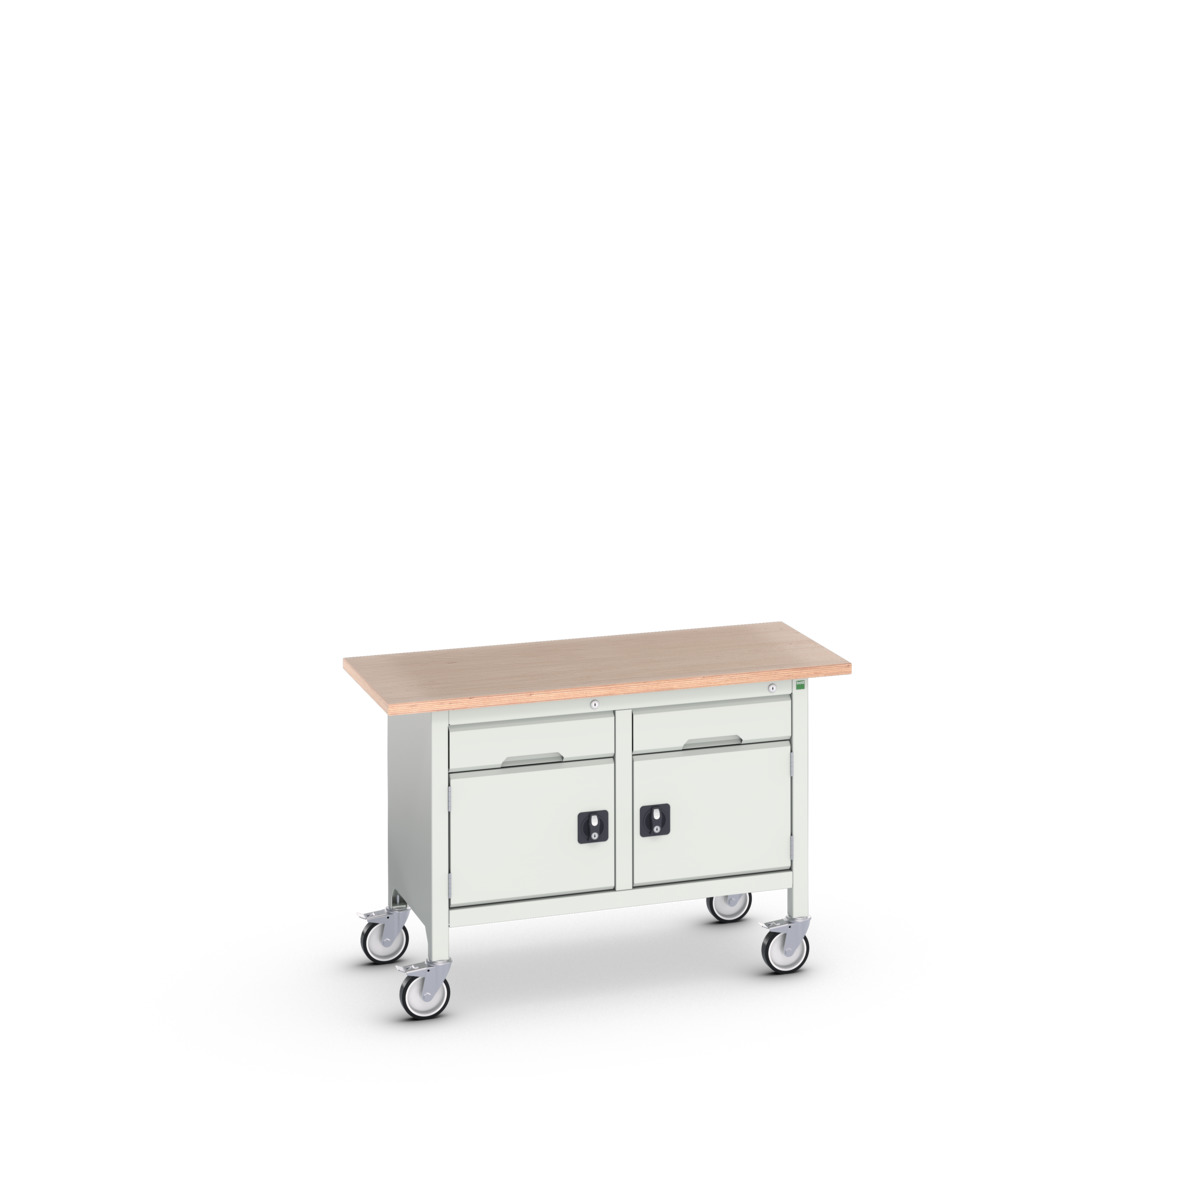 16923201.16 - verso mobile storage bench (mpx)